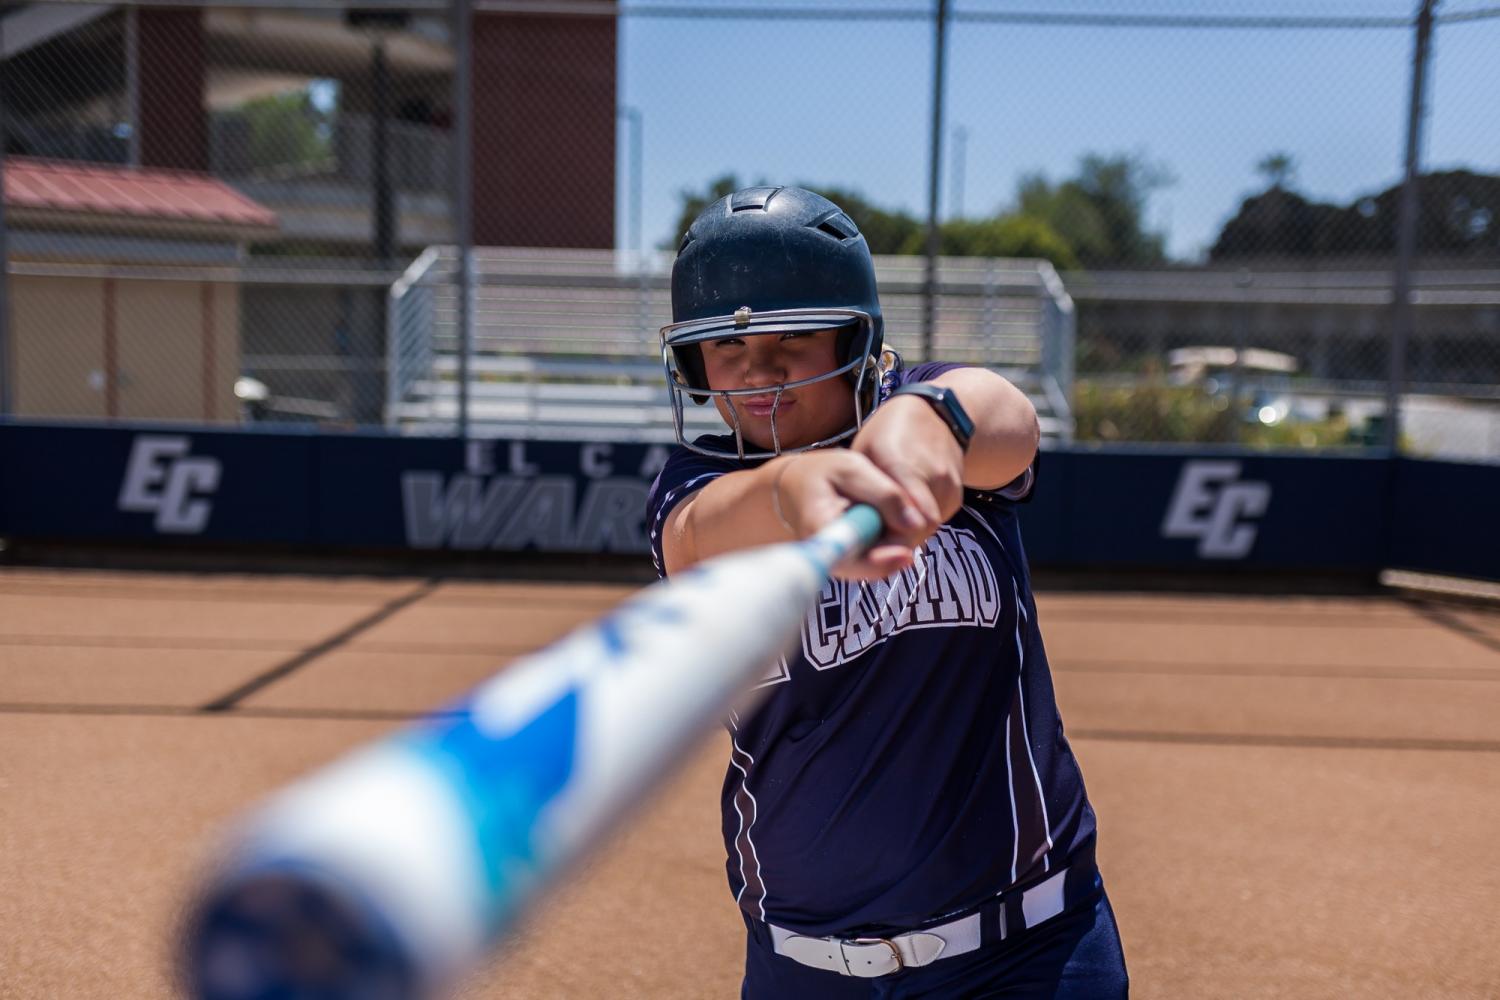 Sophomore+first+baseman+Kamryn+Fisher+earned+Honorable+Mention+from+the+California+Community+College+Athletic+Association.+Photo+credit%3A+John+Lopez